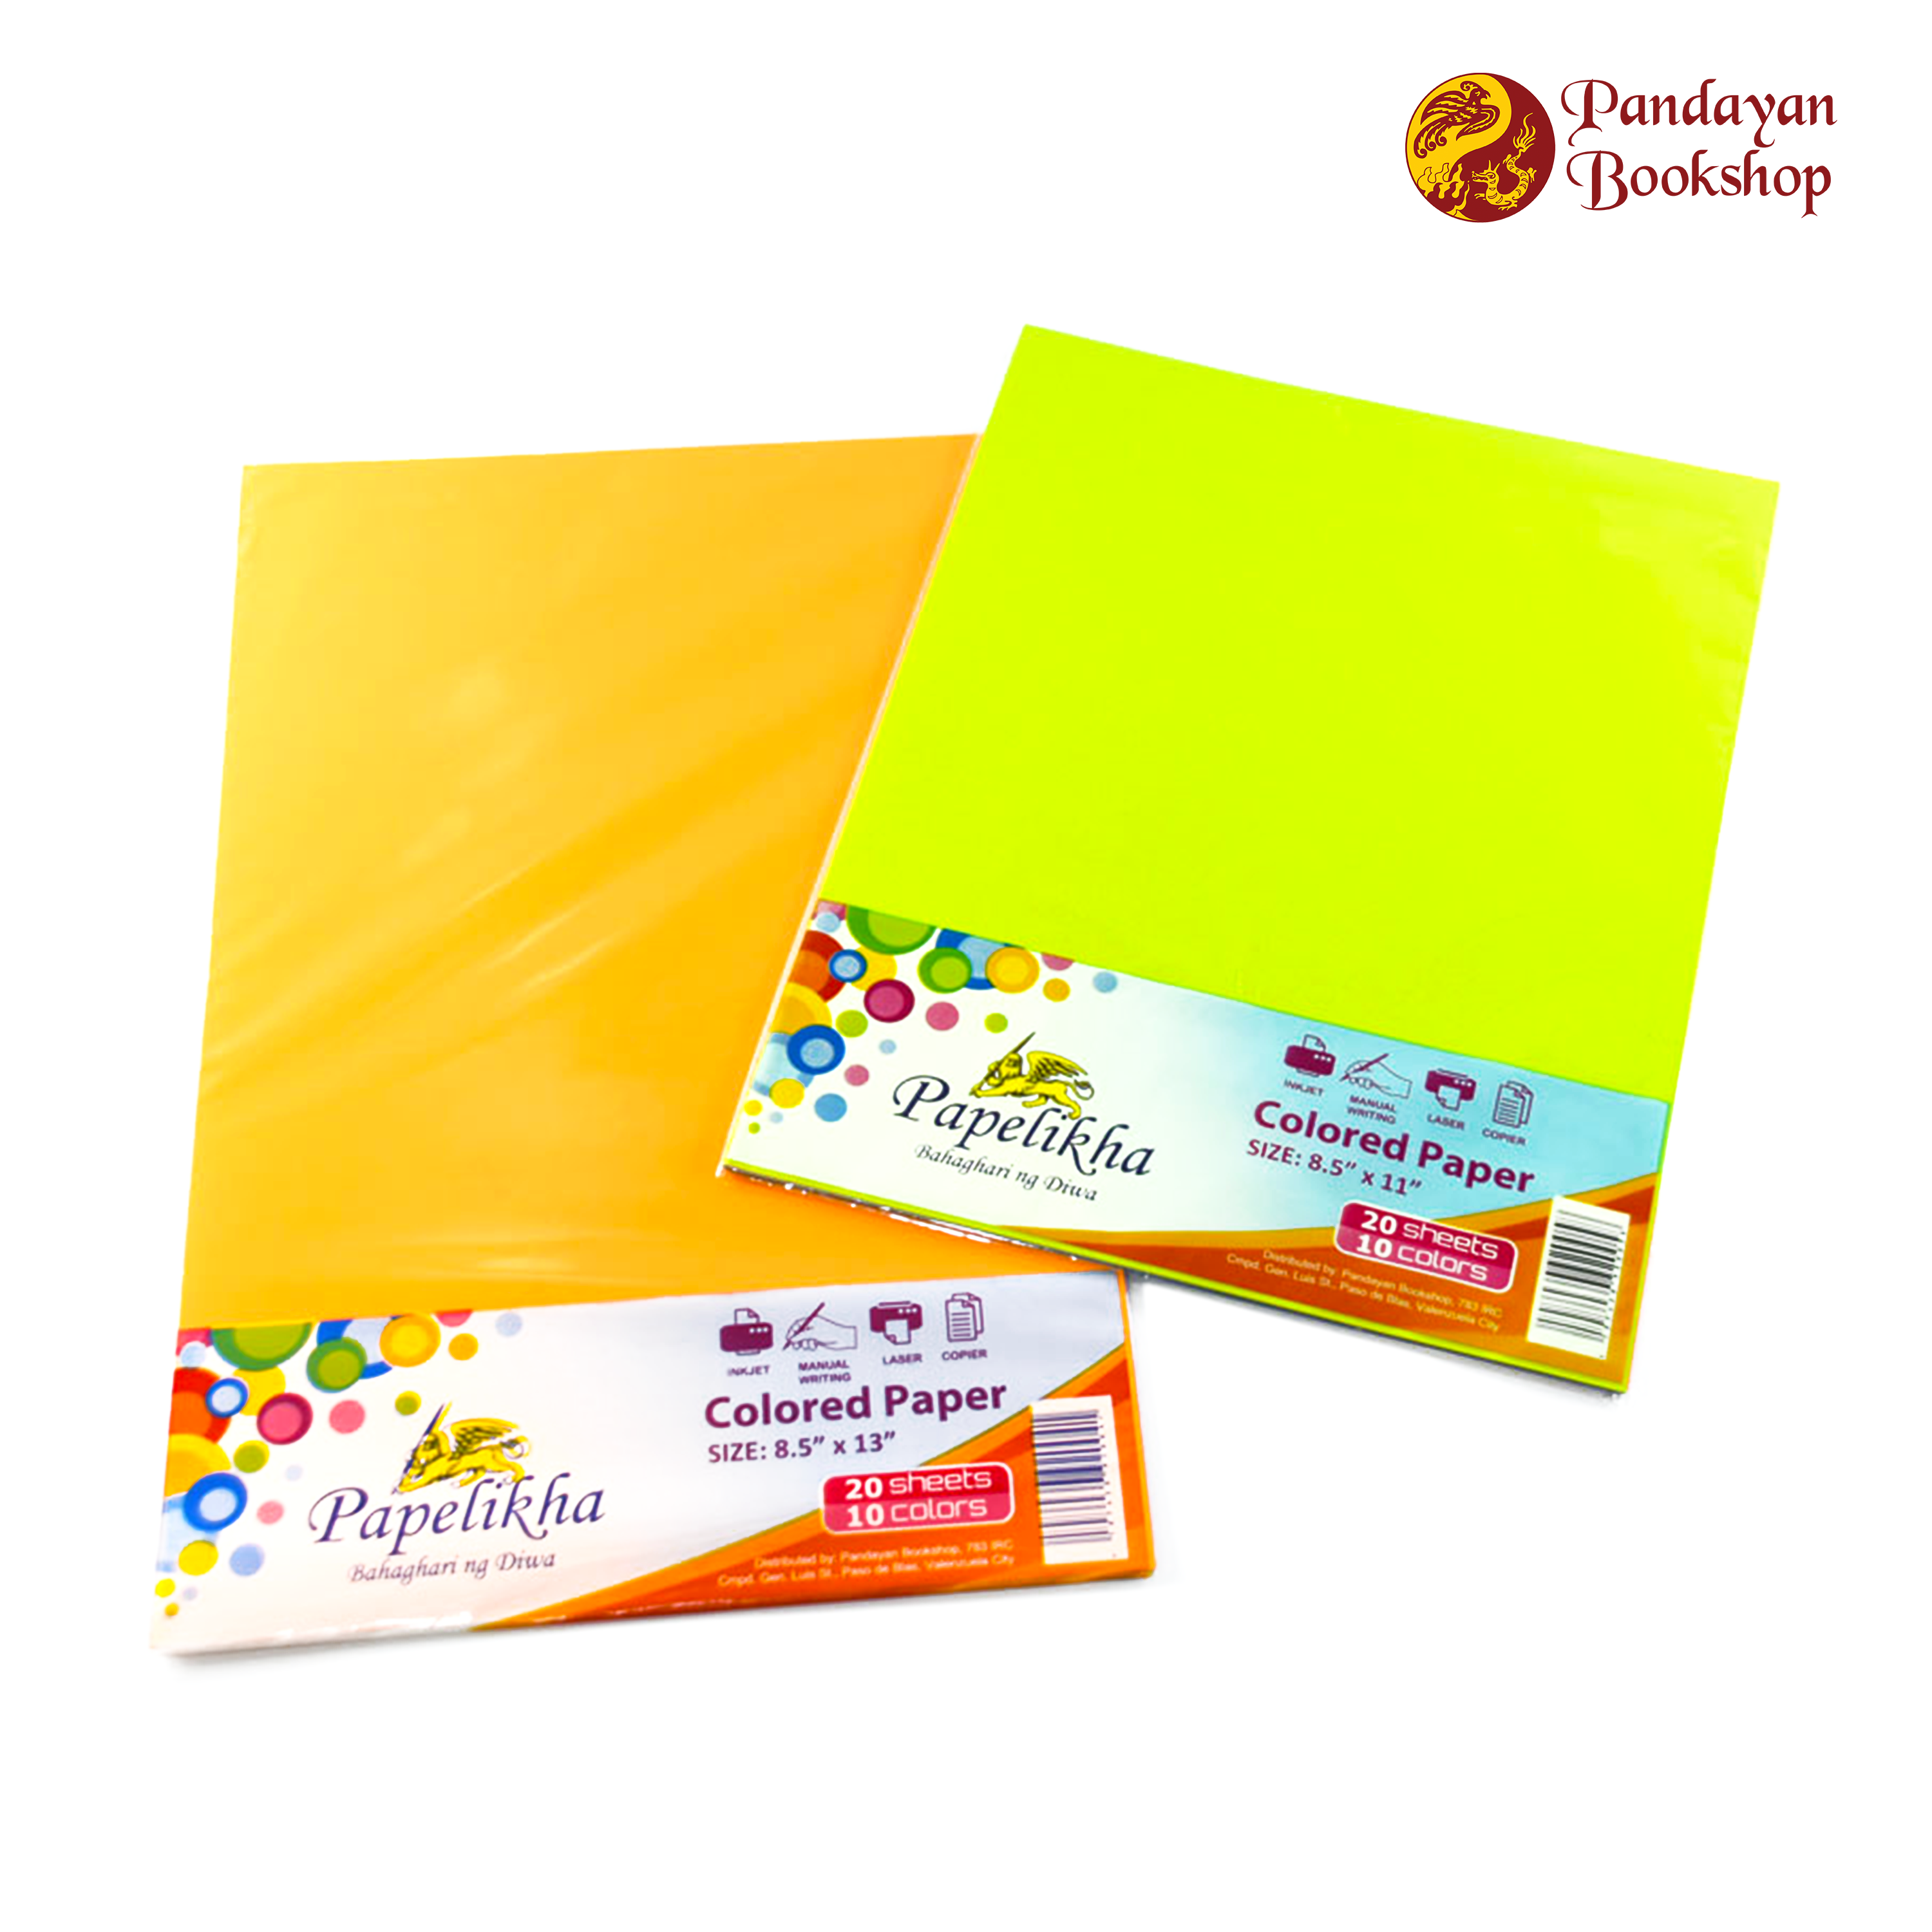 Papelikha Colored Paper Assorted Colors 20s